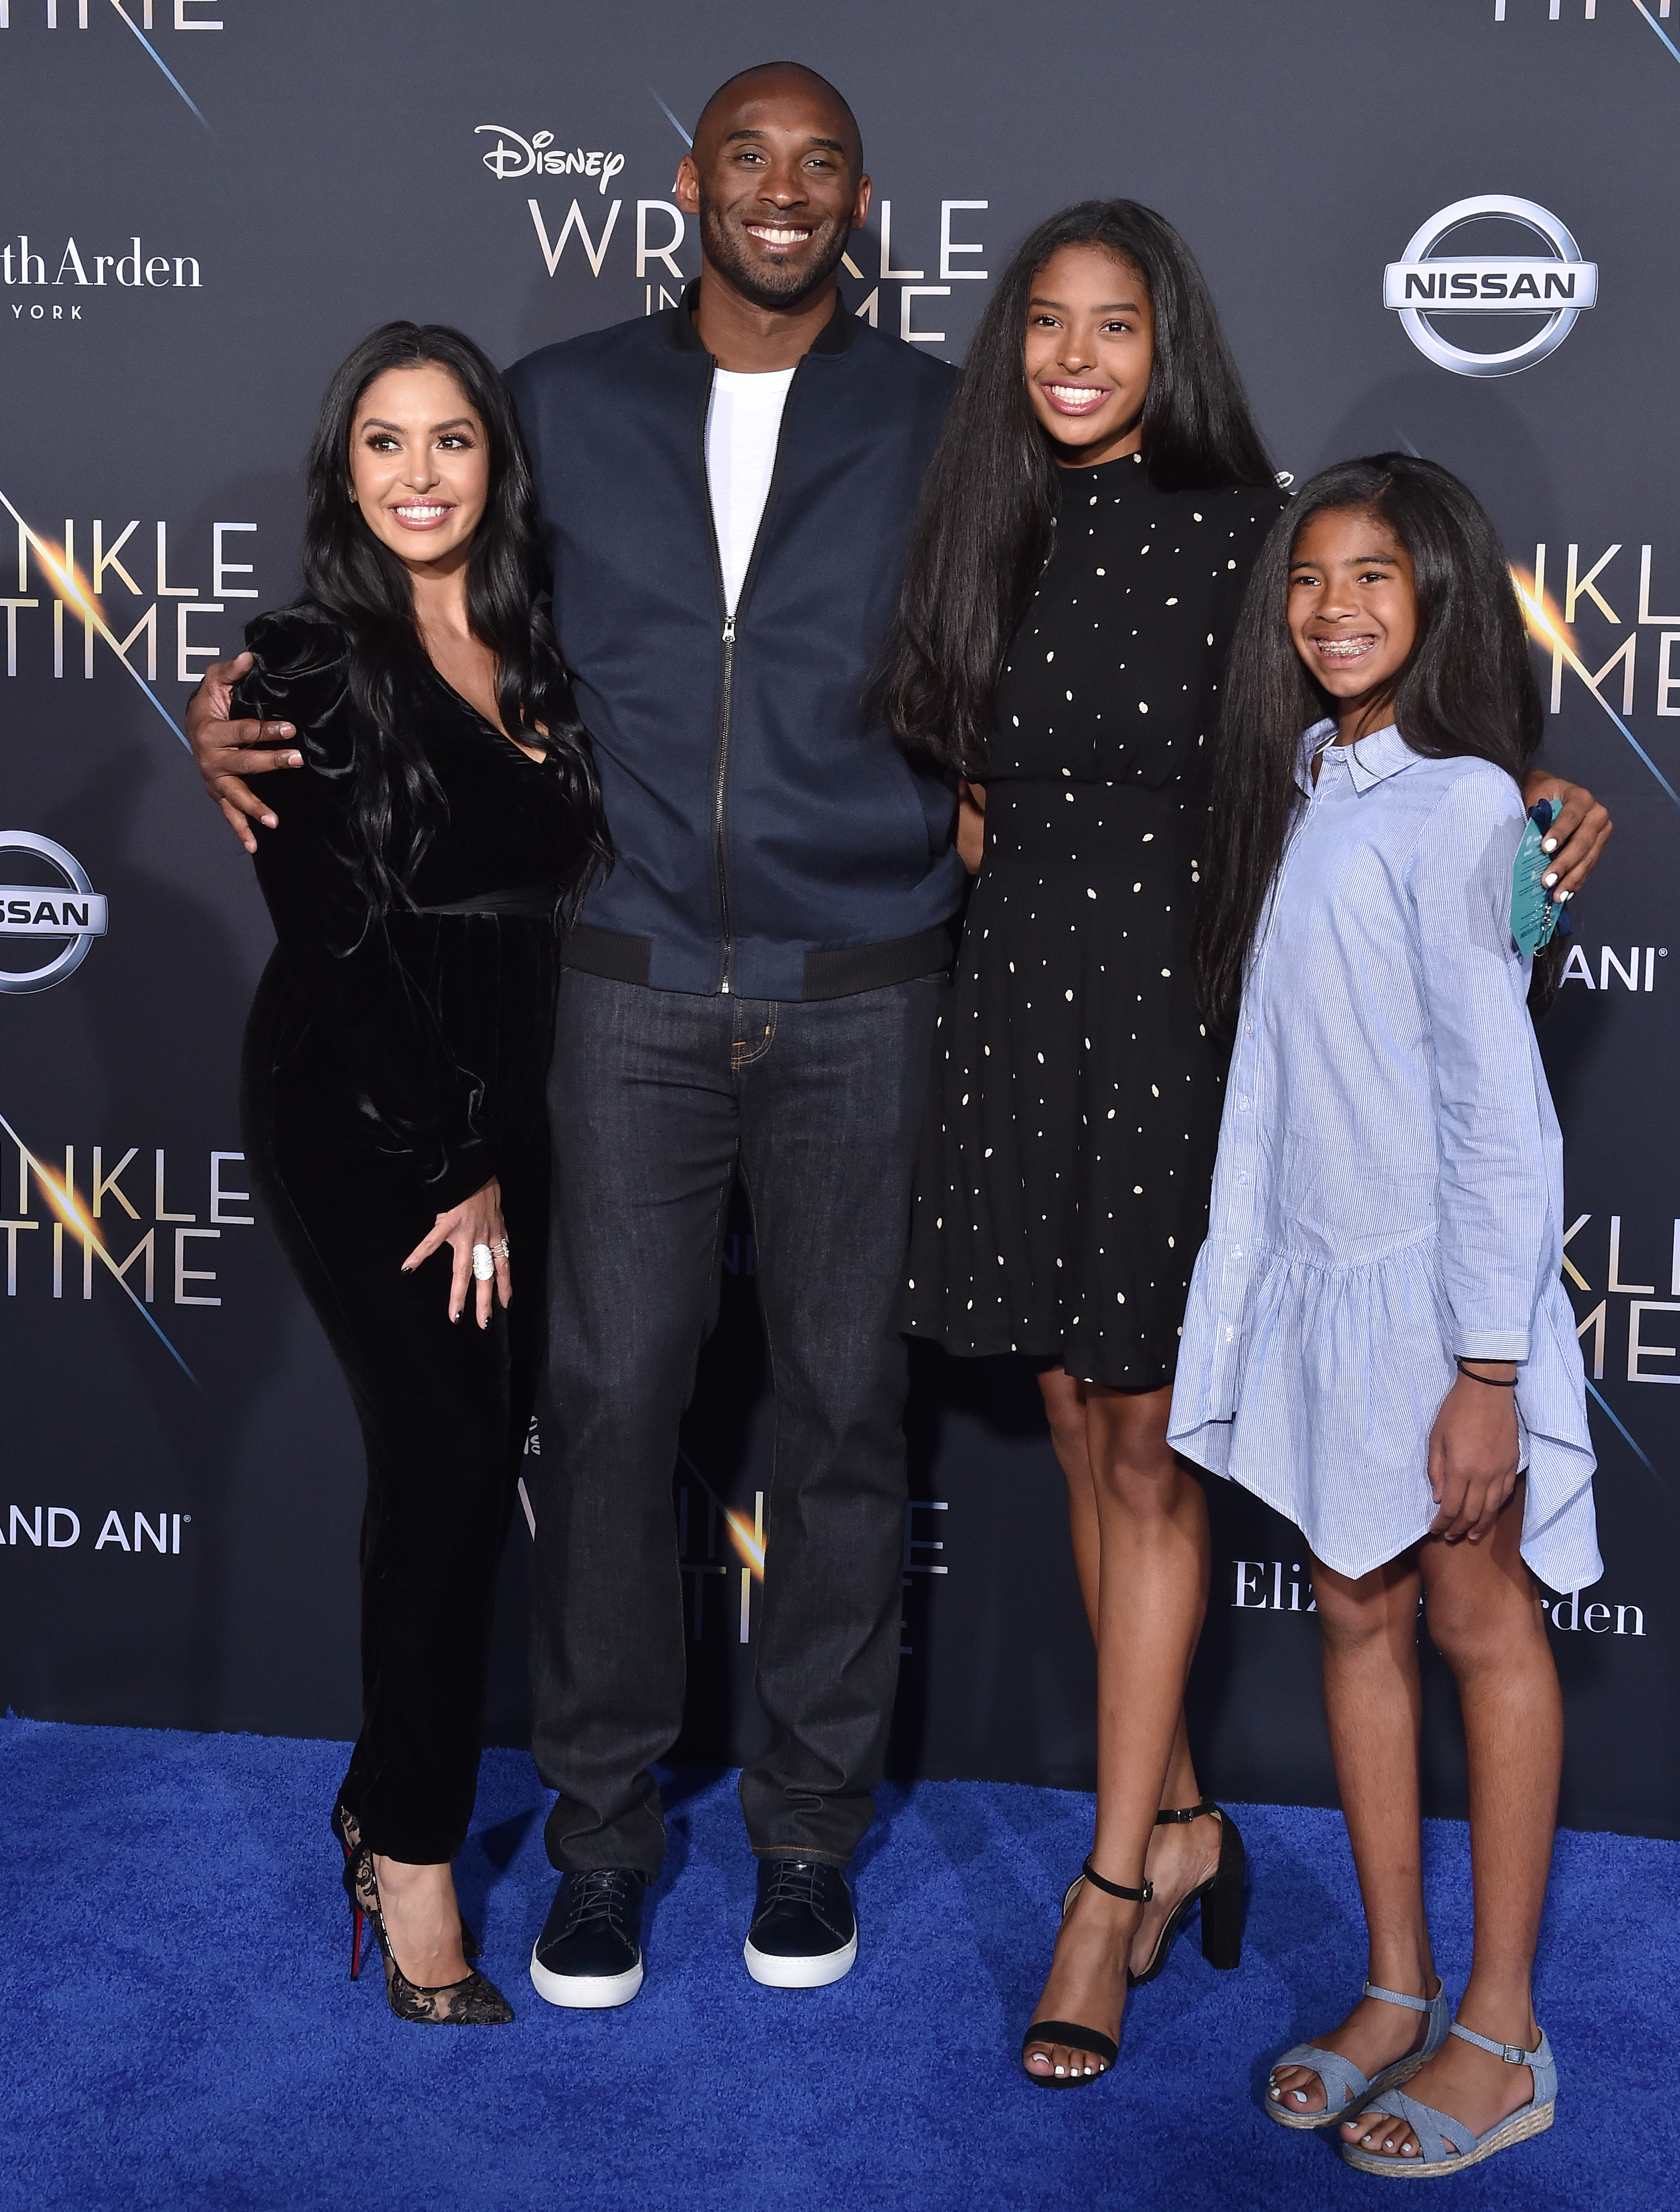 Vanessa Bryant, Kobe Bryant, Natalia Bryant and Gianna Bryant at the premiere of "A Wrinkle In Time," 2018 | Source: Getty Images